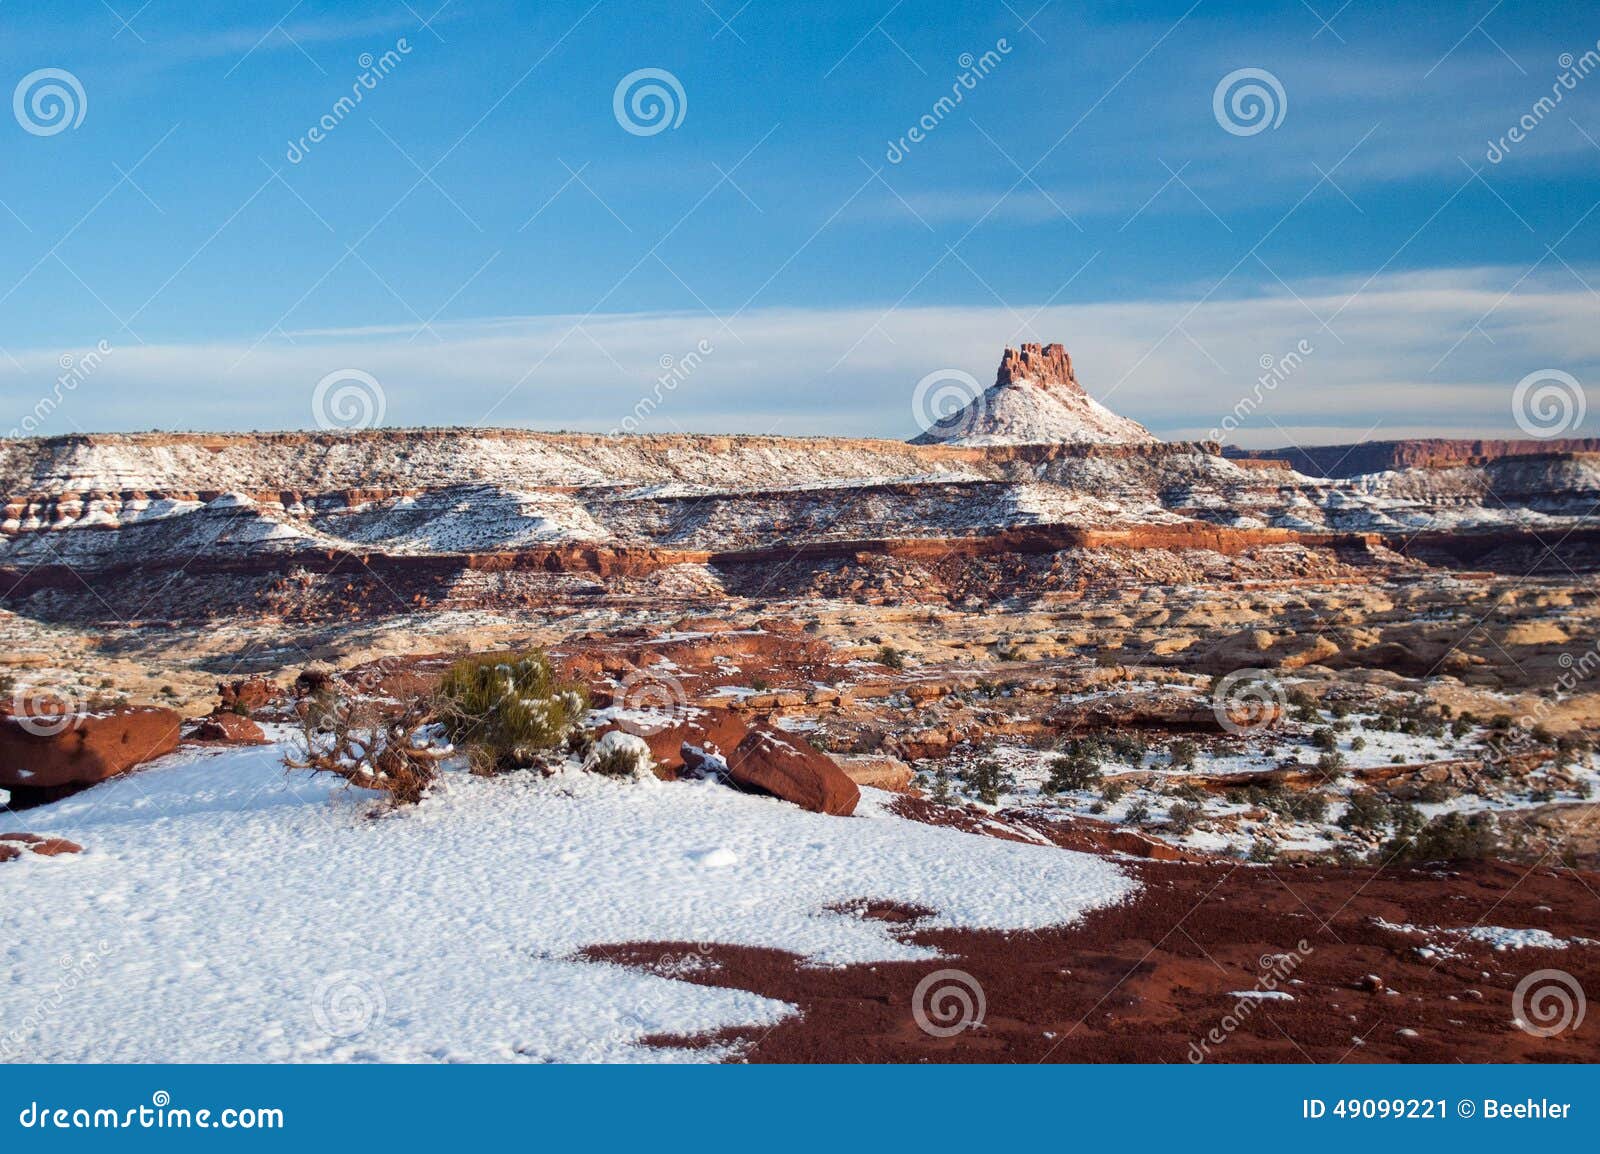 snow covered desert canyons